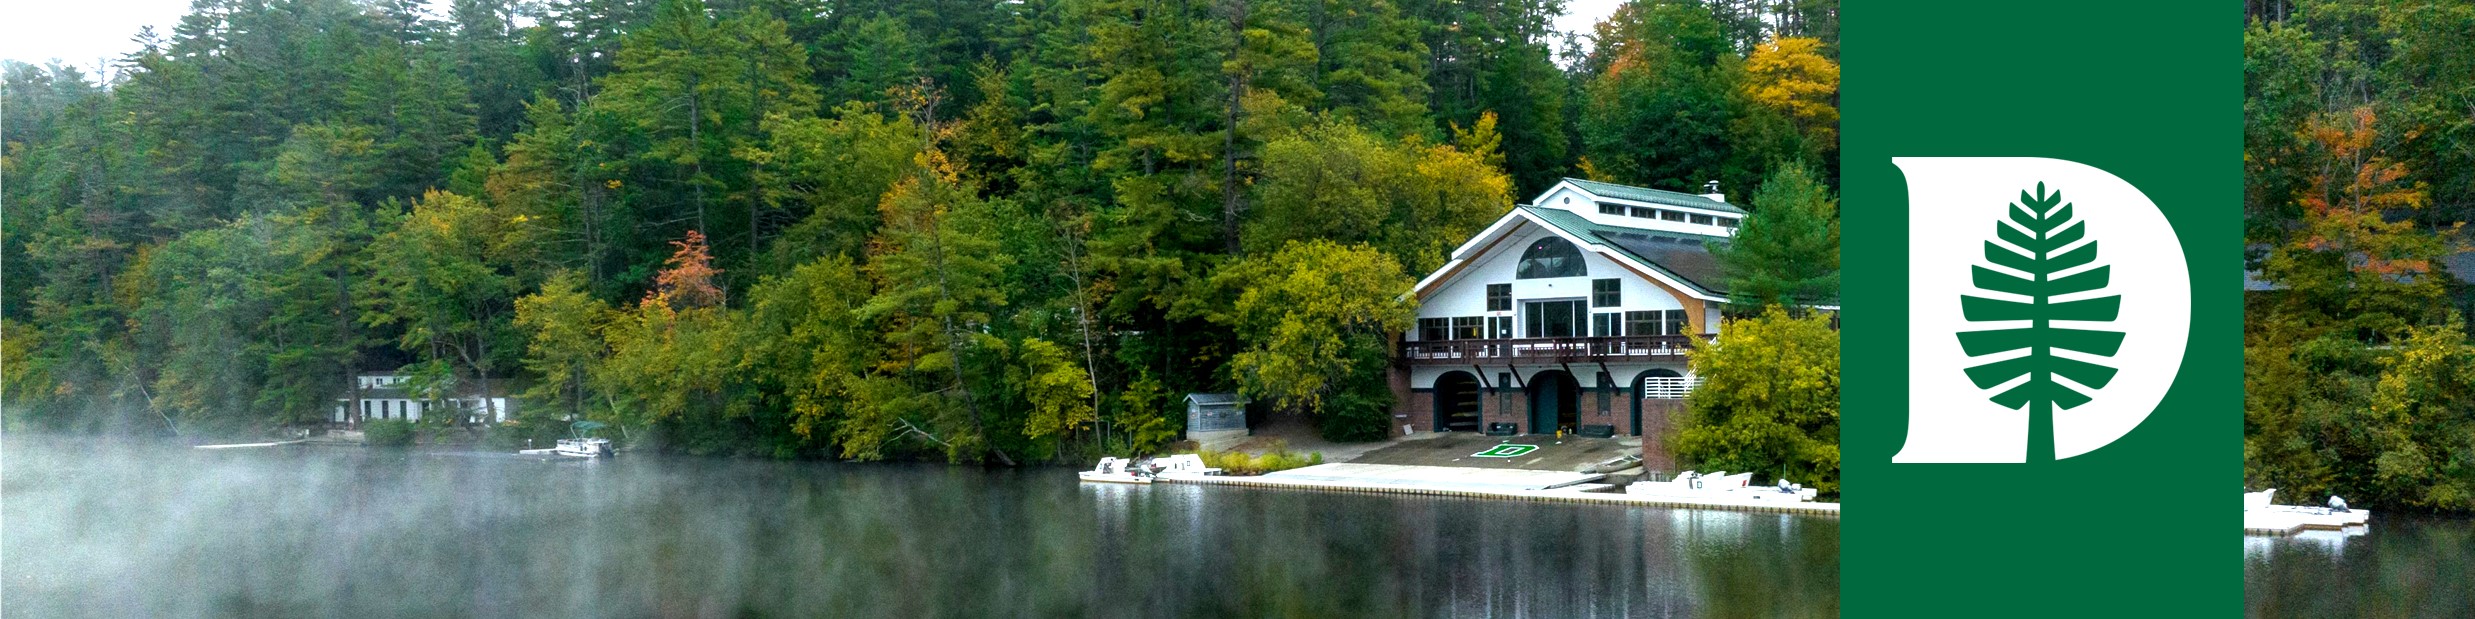 Spring boat house 